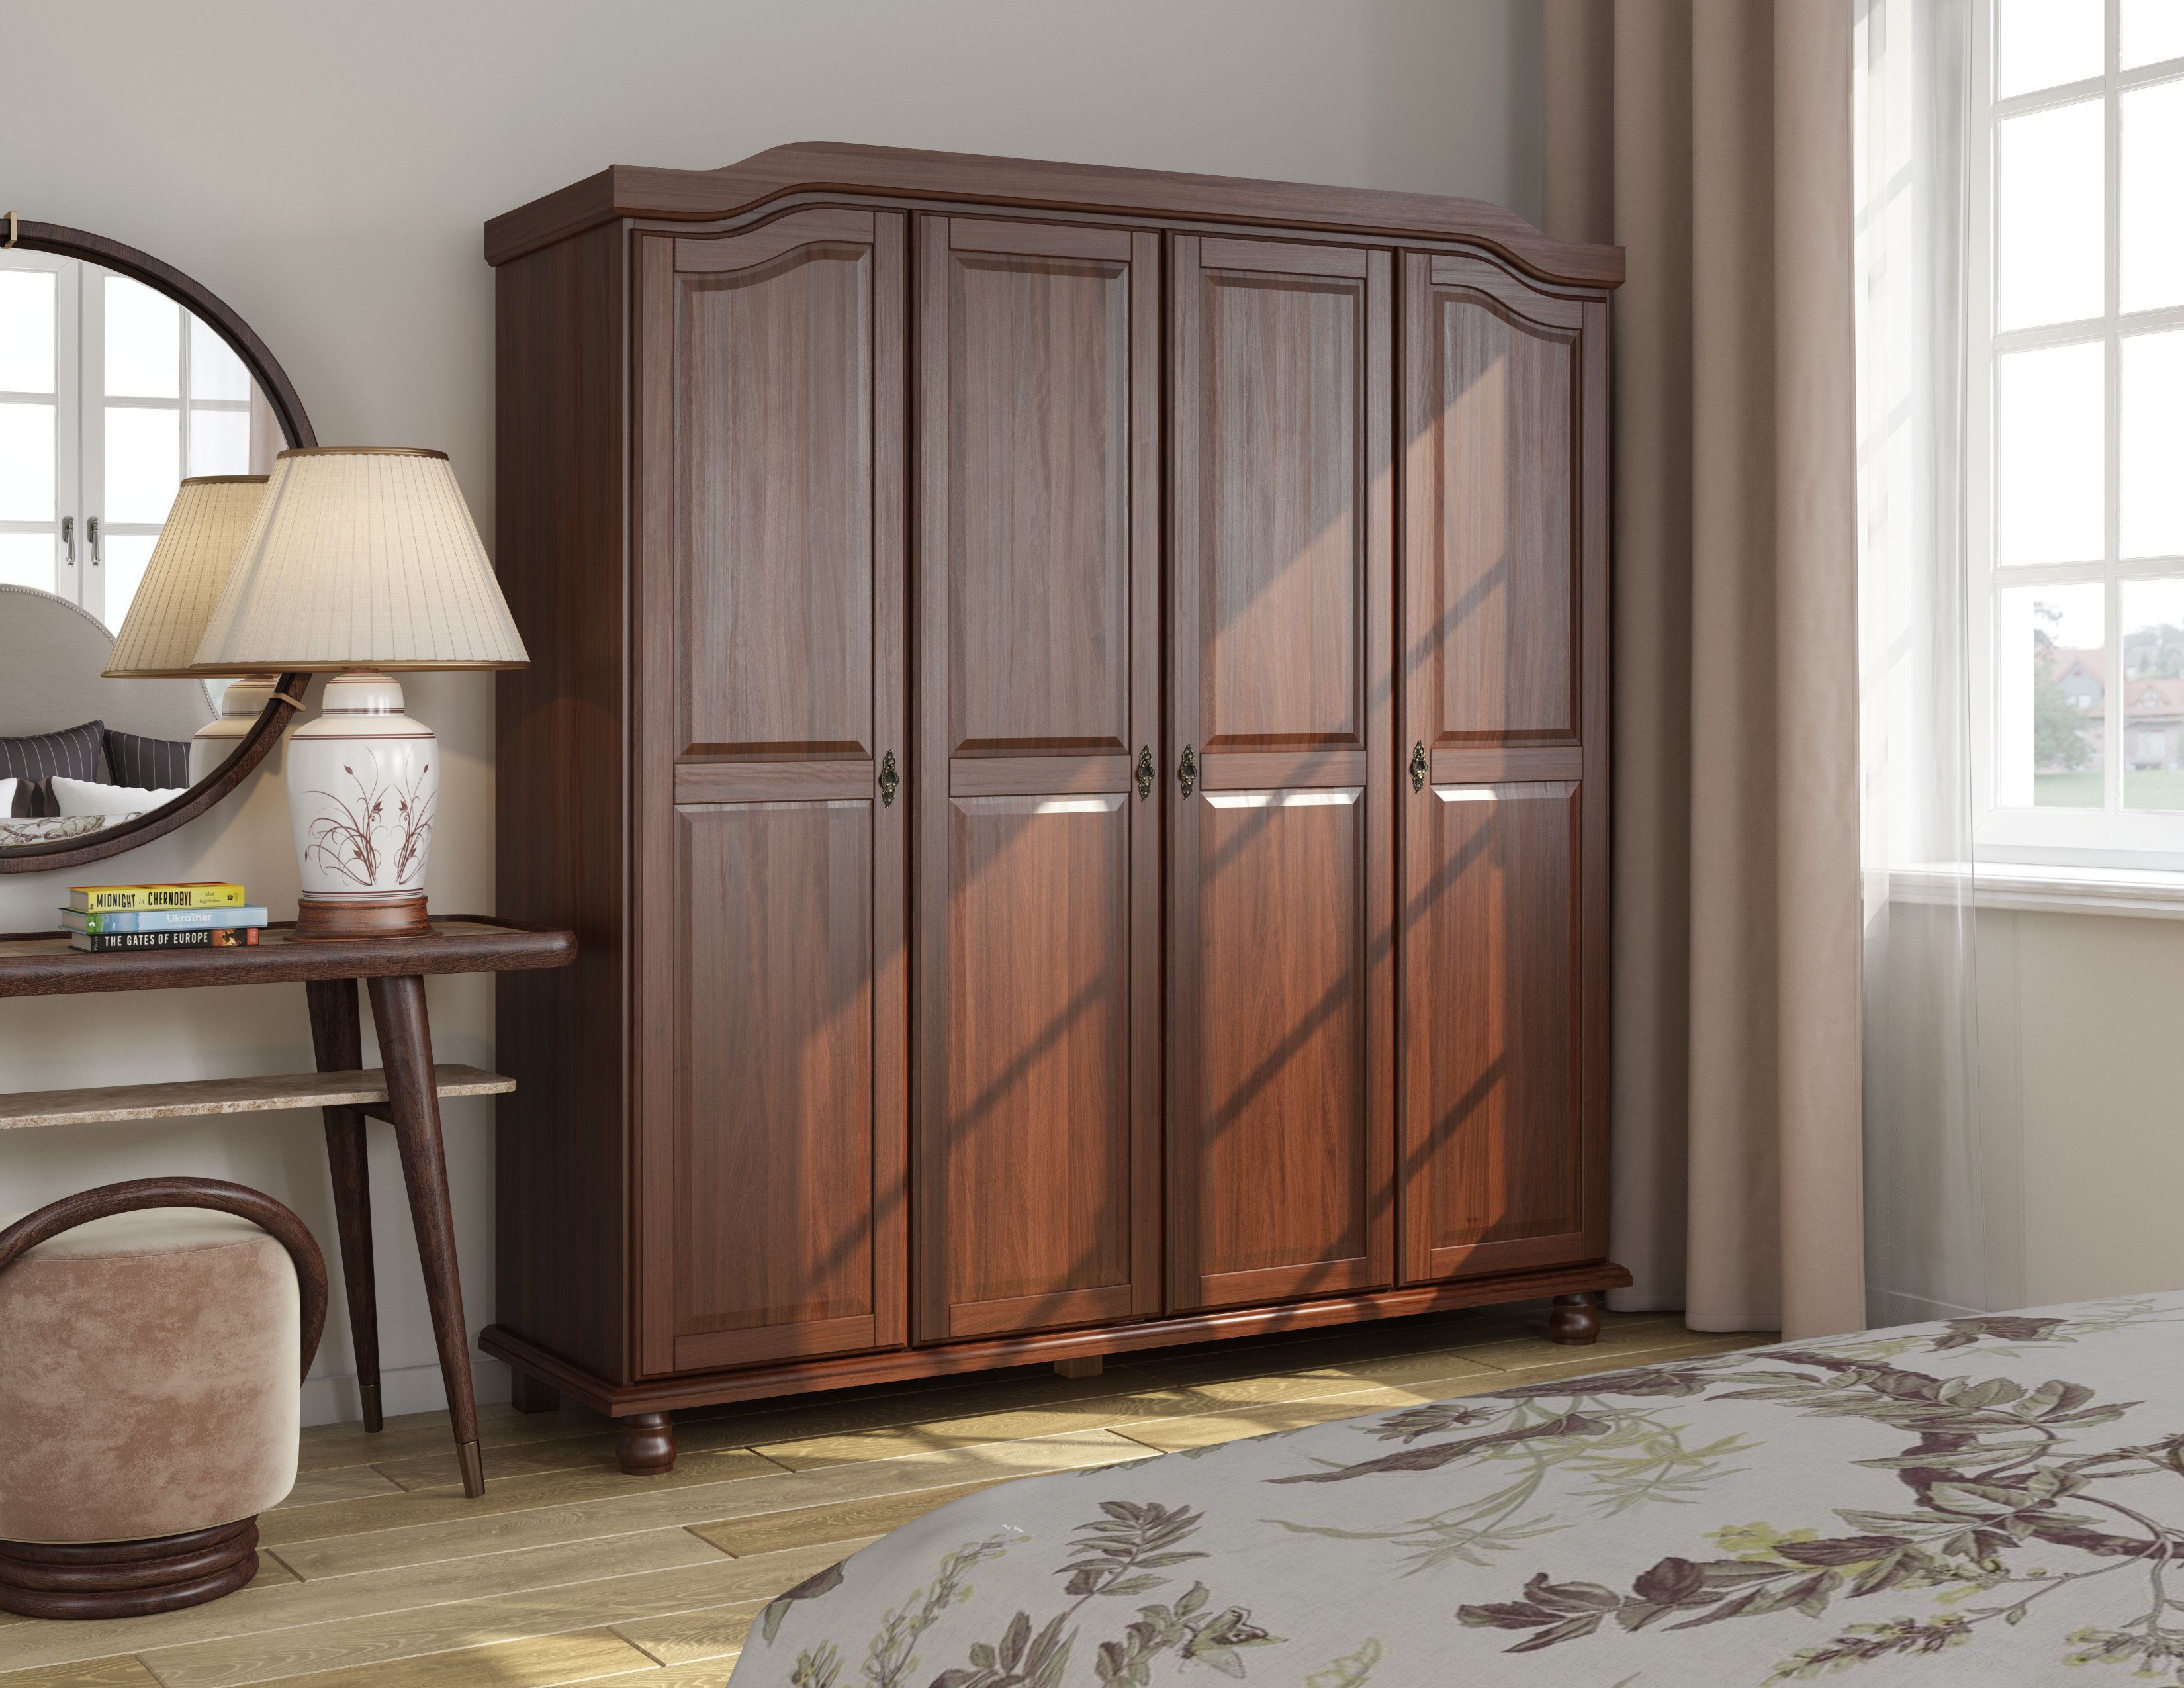 Charlton Home® Kyle 100% Solid Wood 4 Door Wardrobe Armoire & Reviews |  Wayfair With Solid Wood Wardrobe Closets (View 5 of 15)